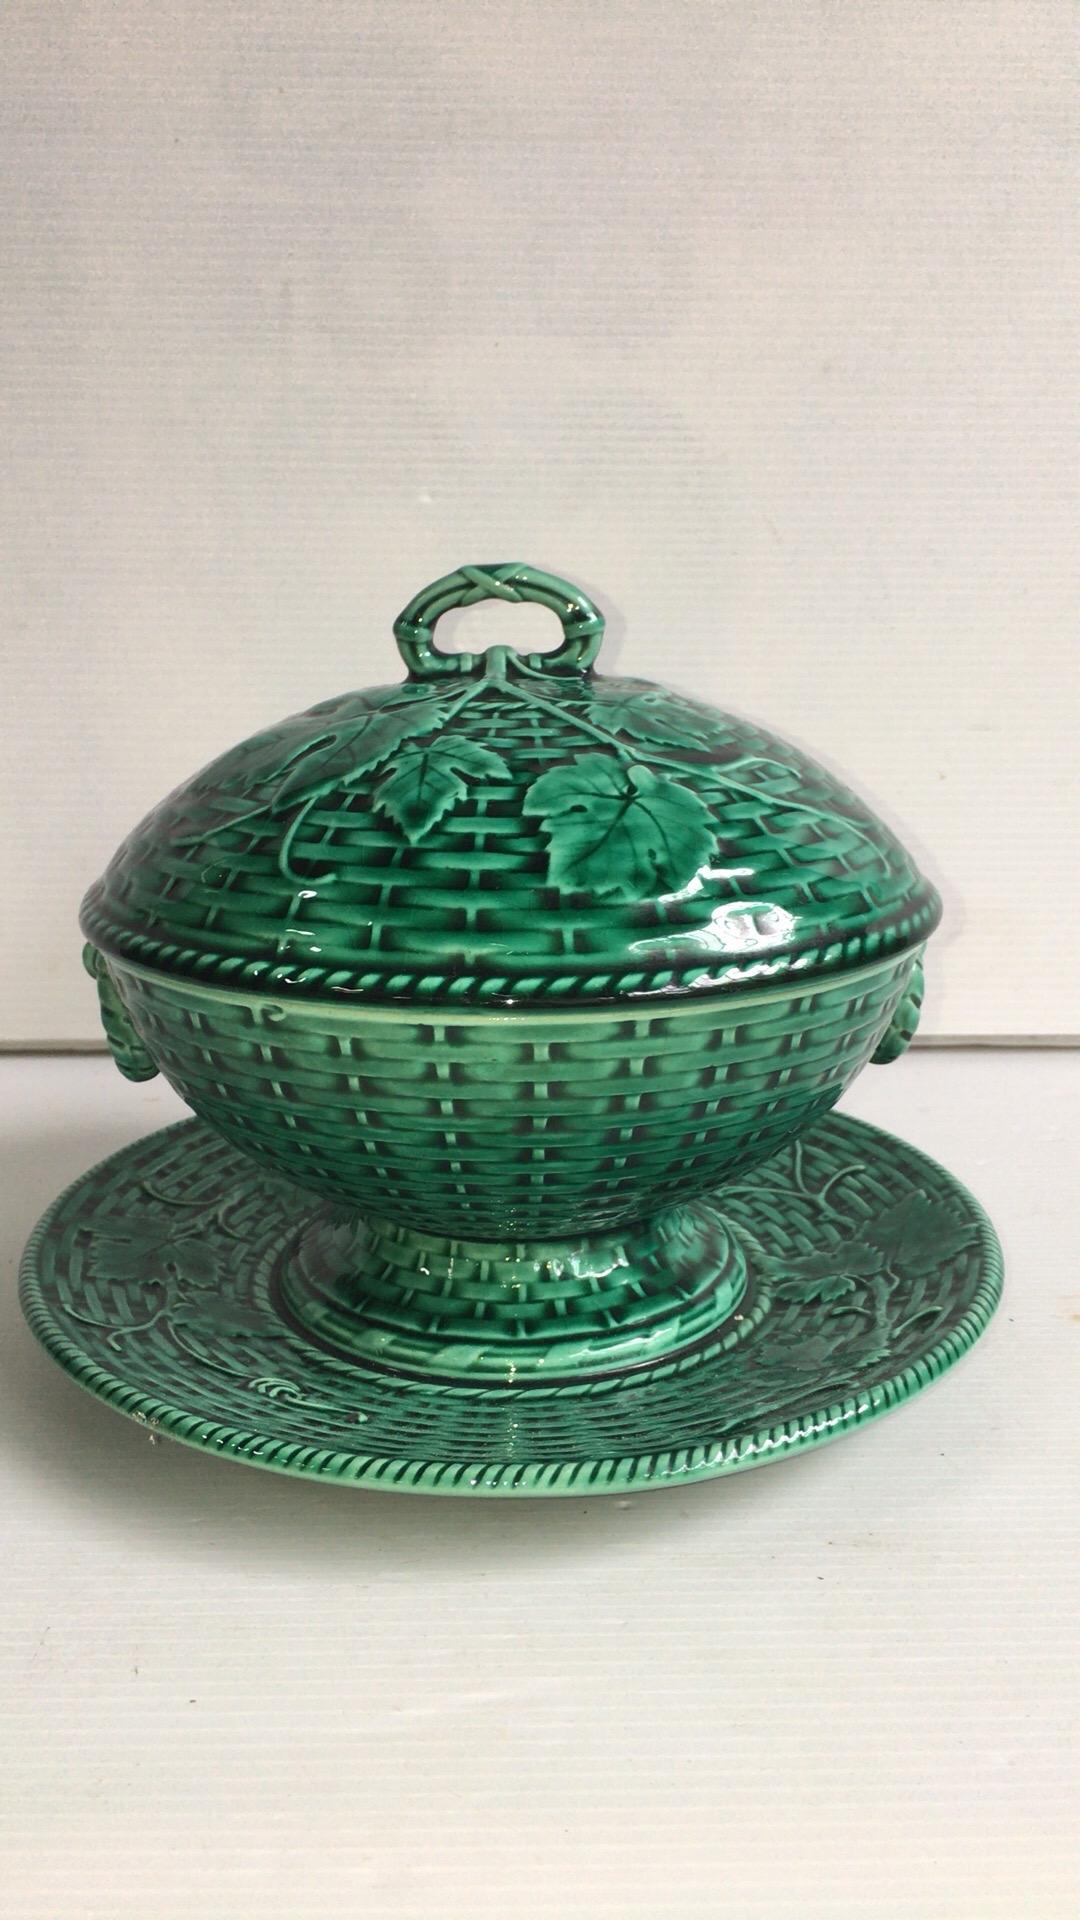 19th Century green Majolica tureen with stand signed Sarreguemines Majolica, circa 1870
With grapes leaves.
Height / 7.5